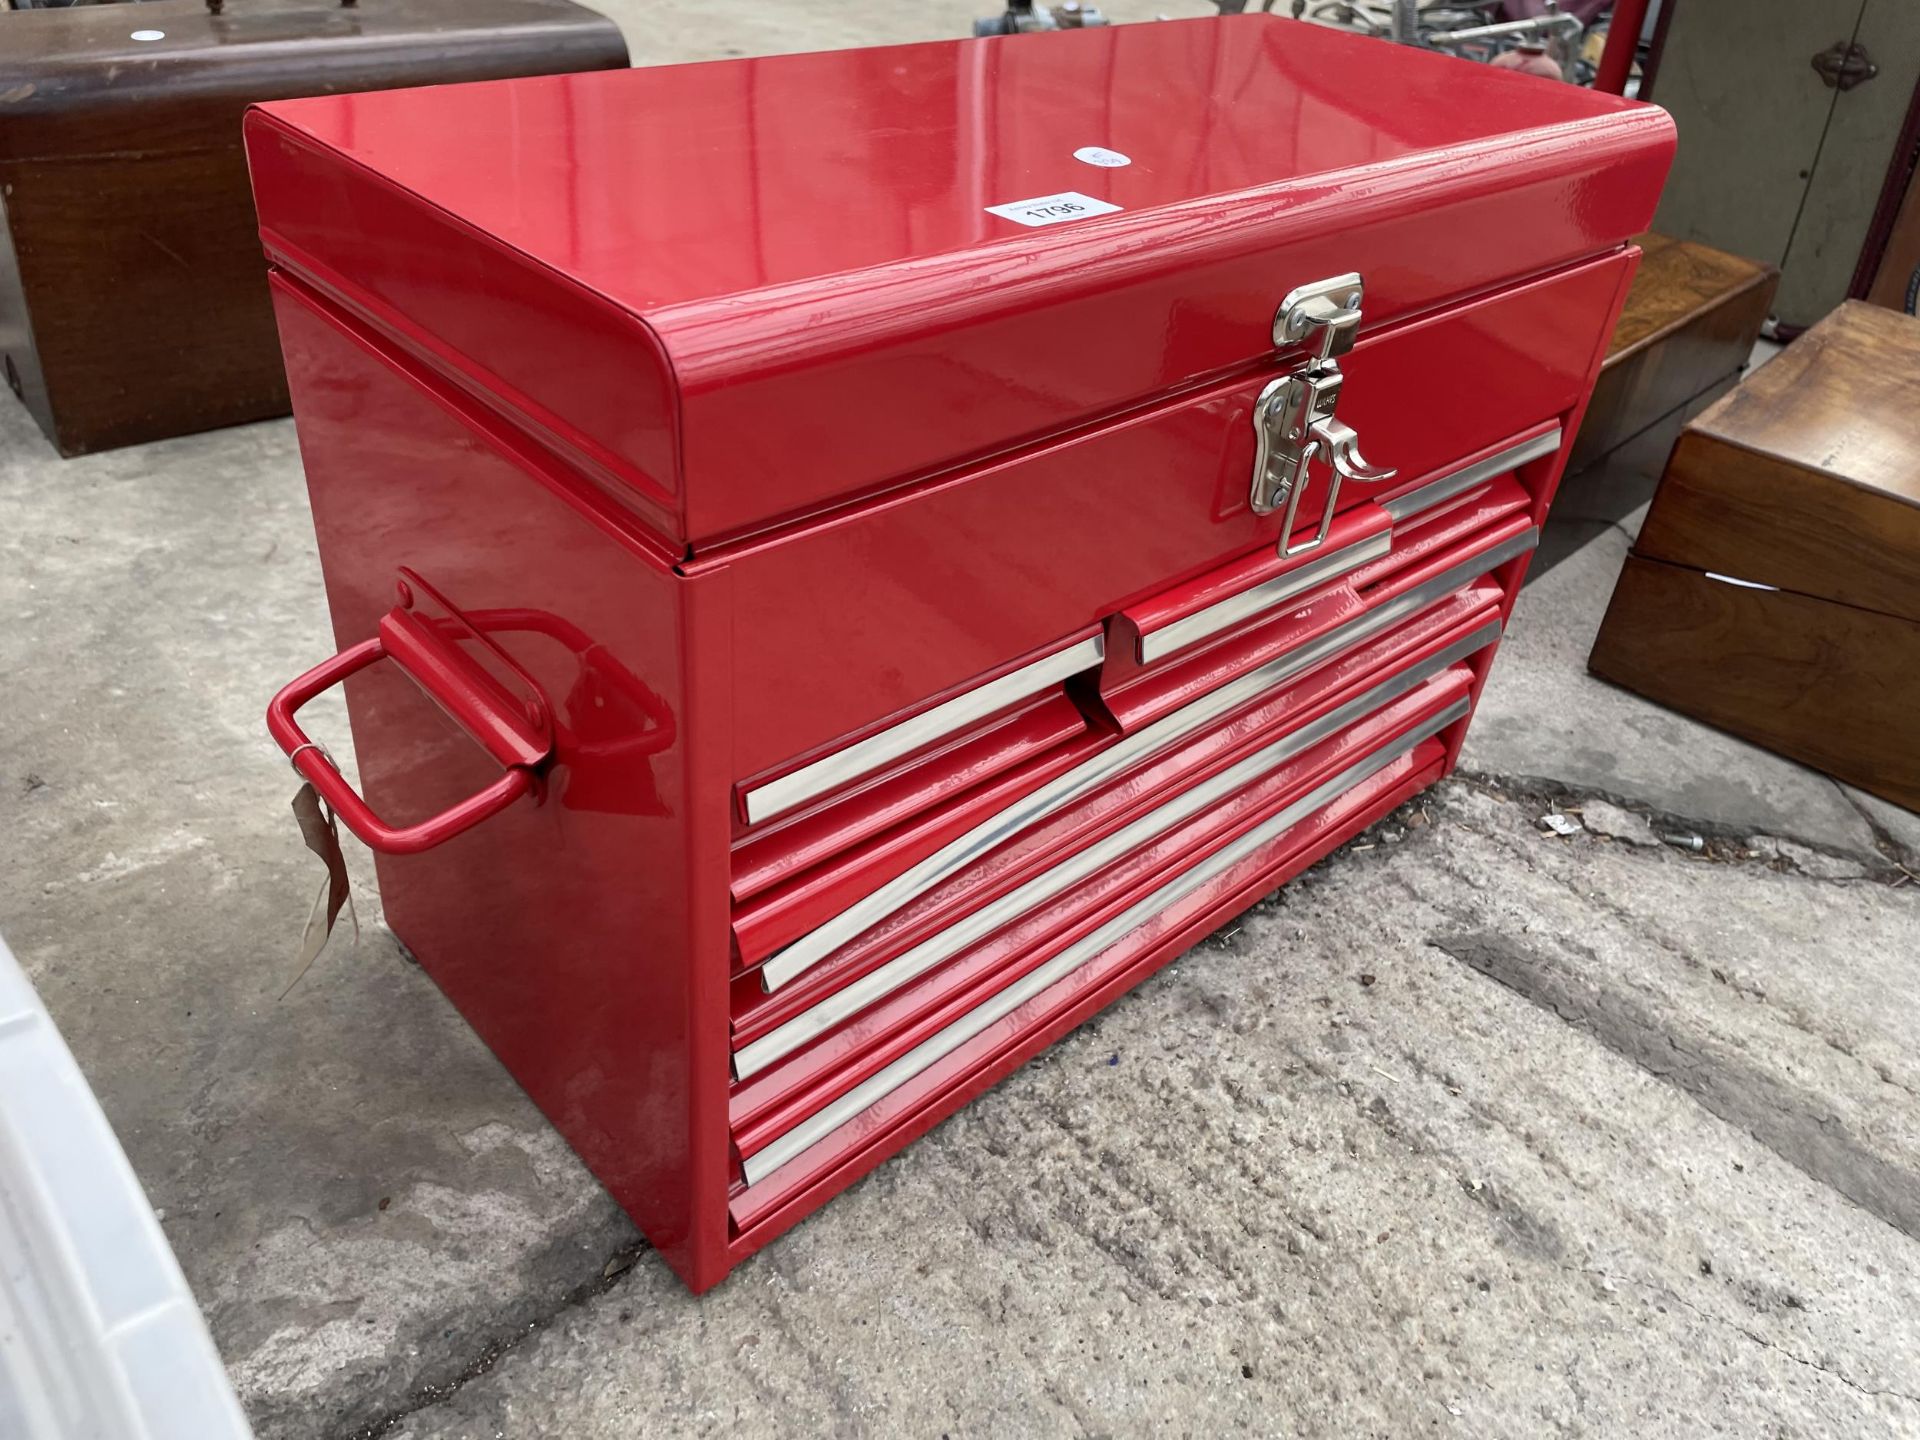 A RED METAL WORKSHOP TOOL BOX WITH SIX DRAWERS AND A TOP STORAGE COMPARTMENT - Image 2 of 4